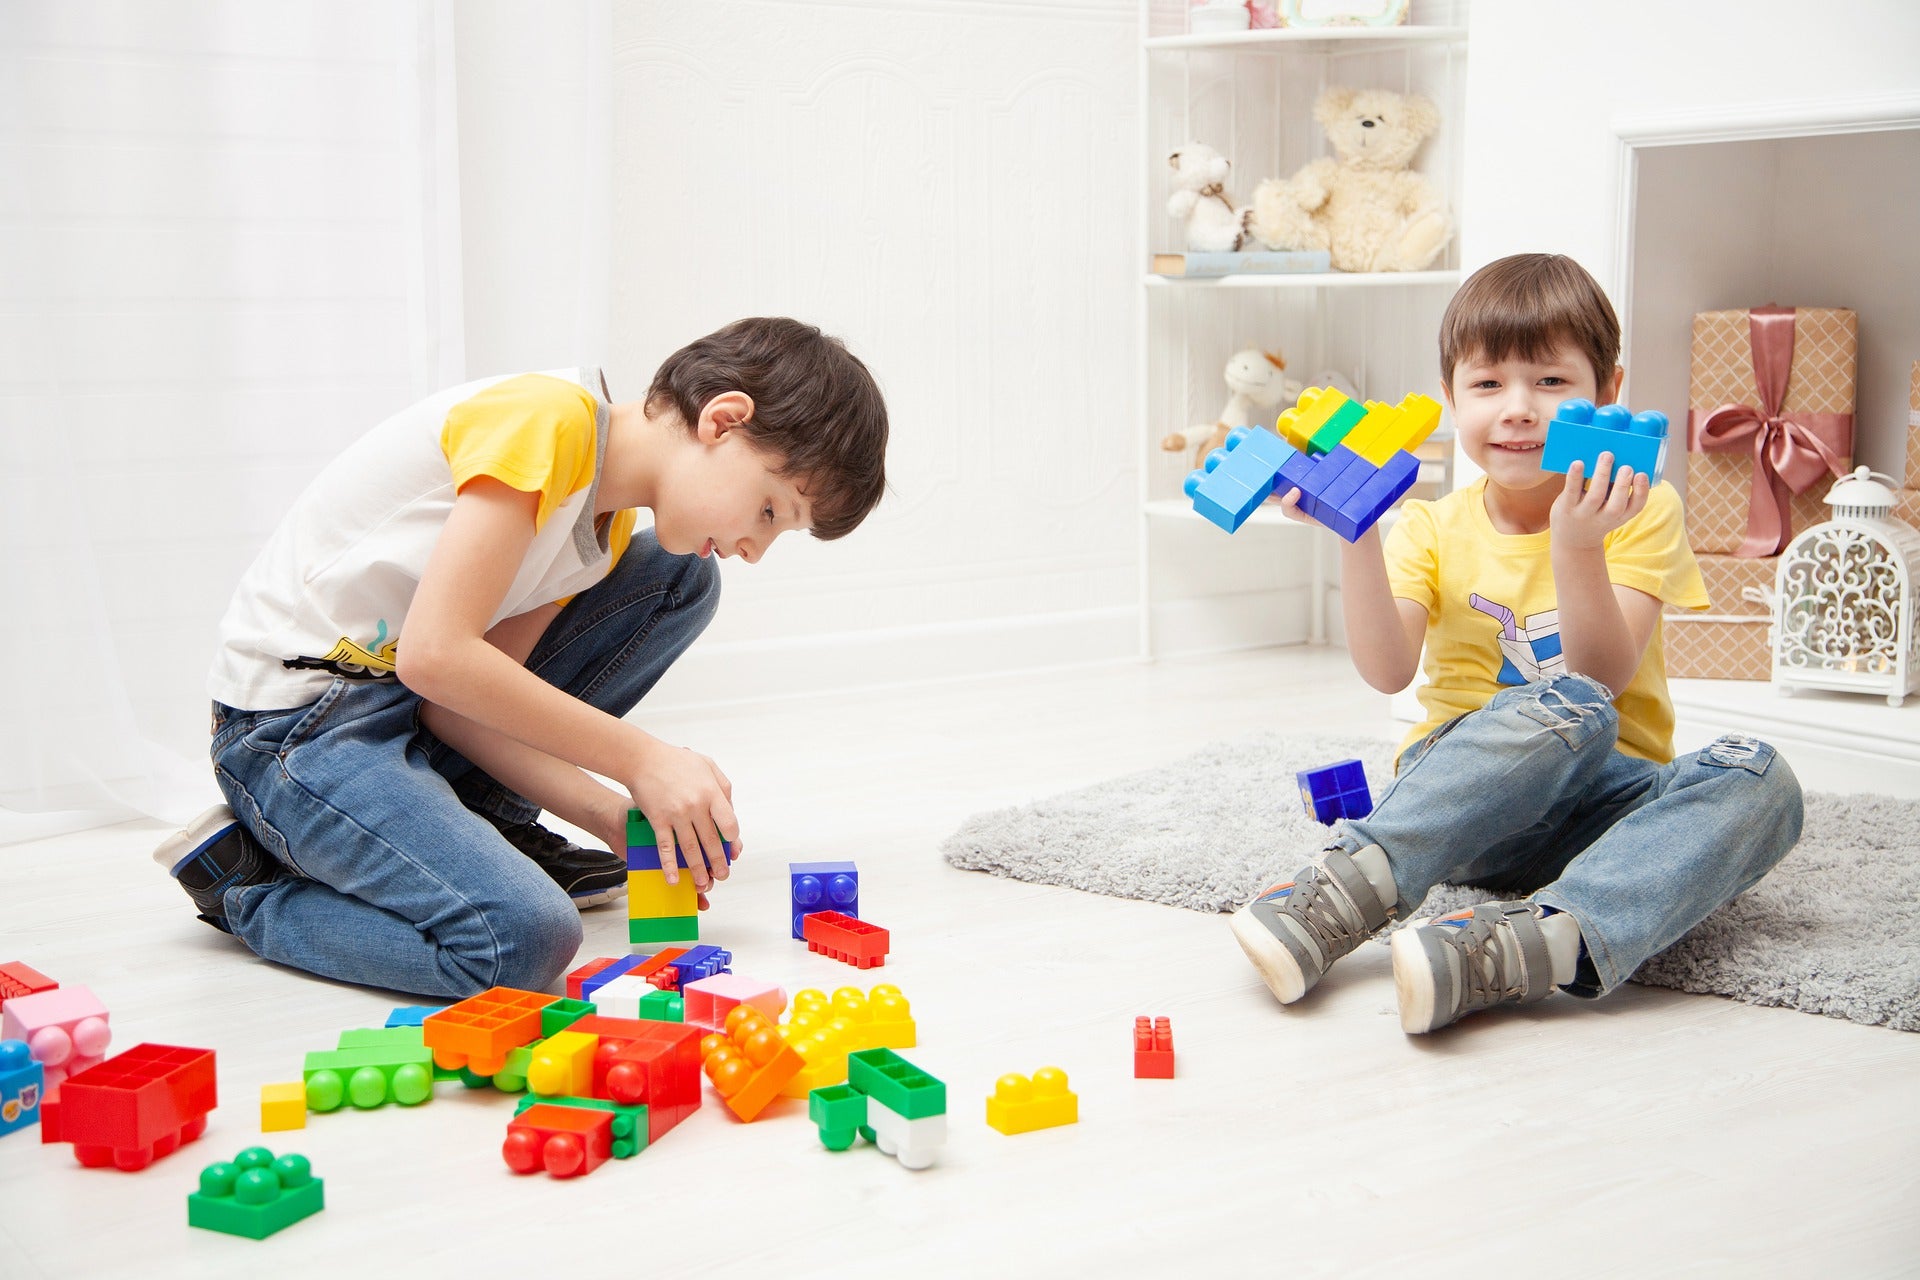 two boys playing colorful blocks